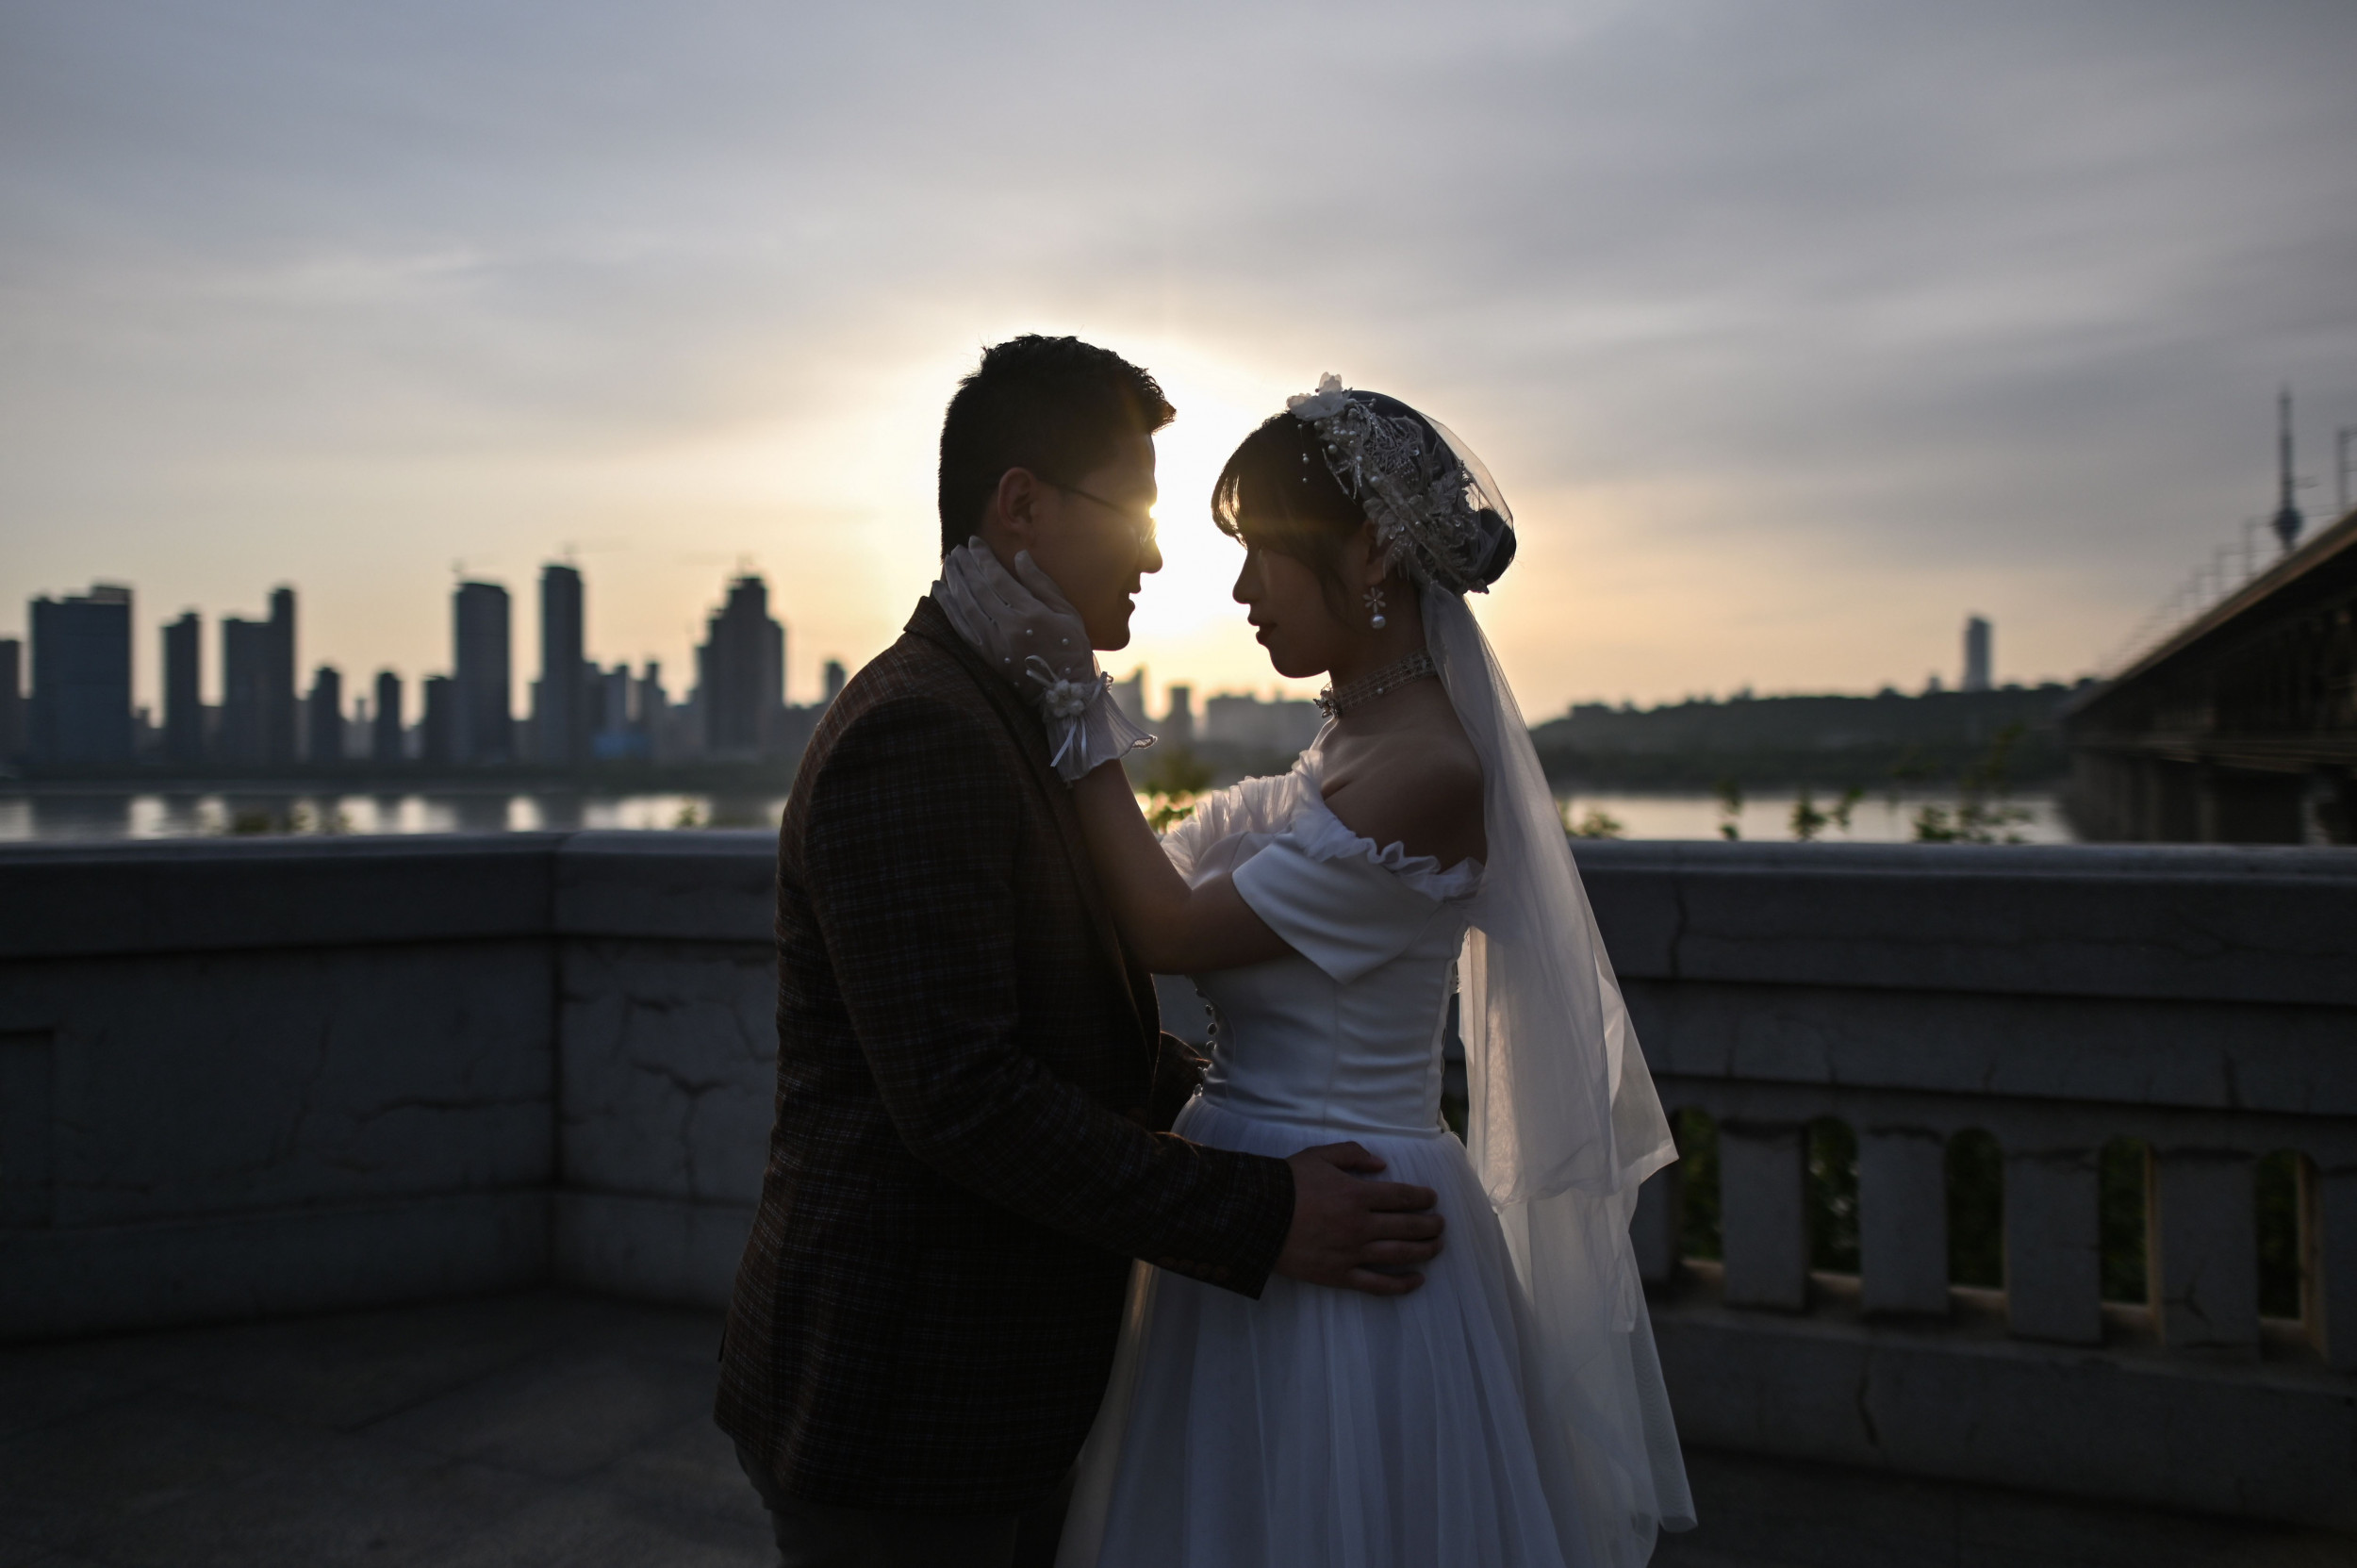 Wedding Photographer Reveals 3 ‘Indicators’ That a Marriage Won’t Last in Viral Video